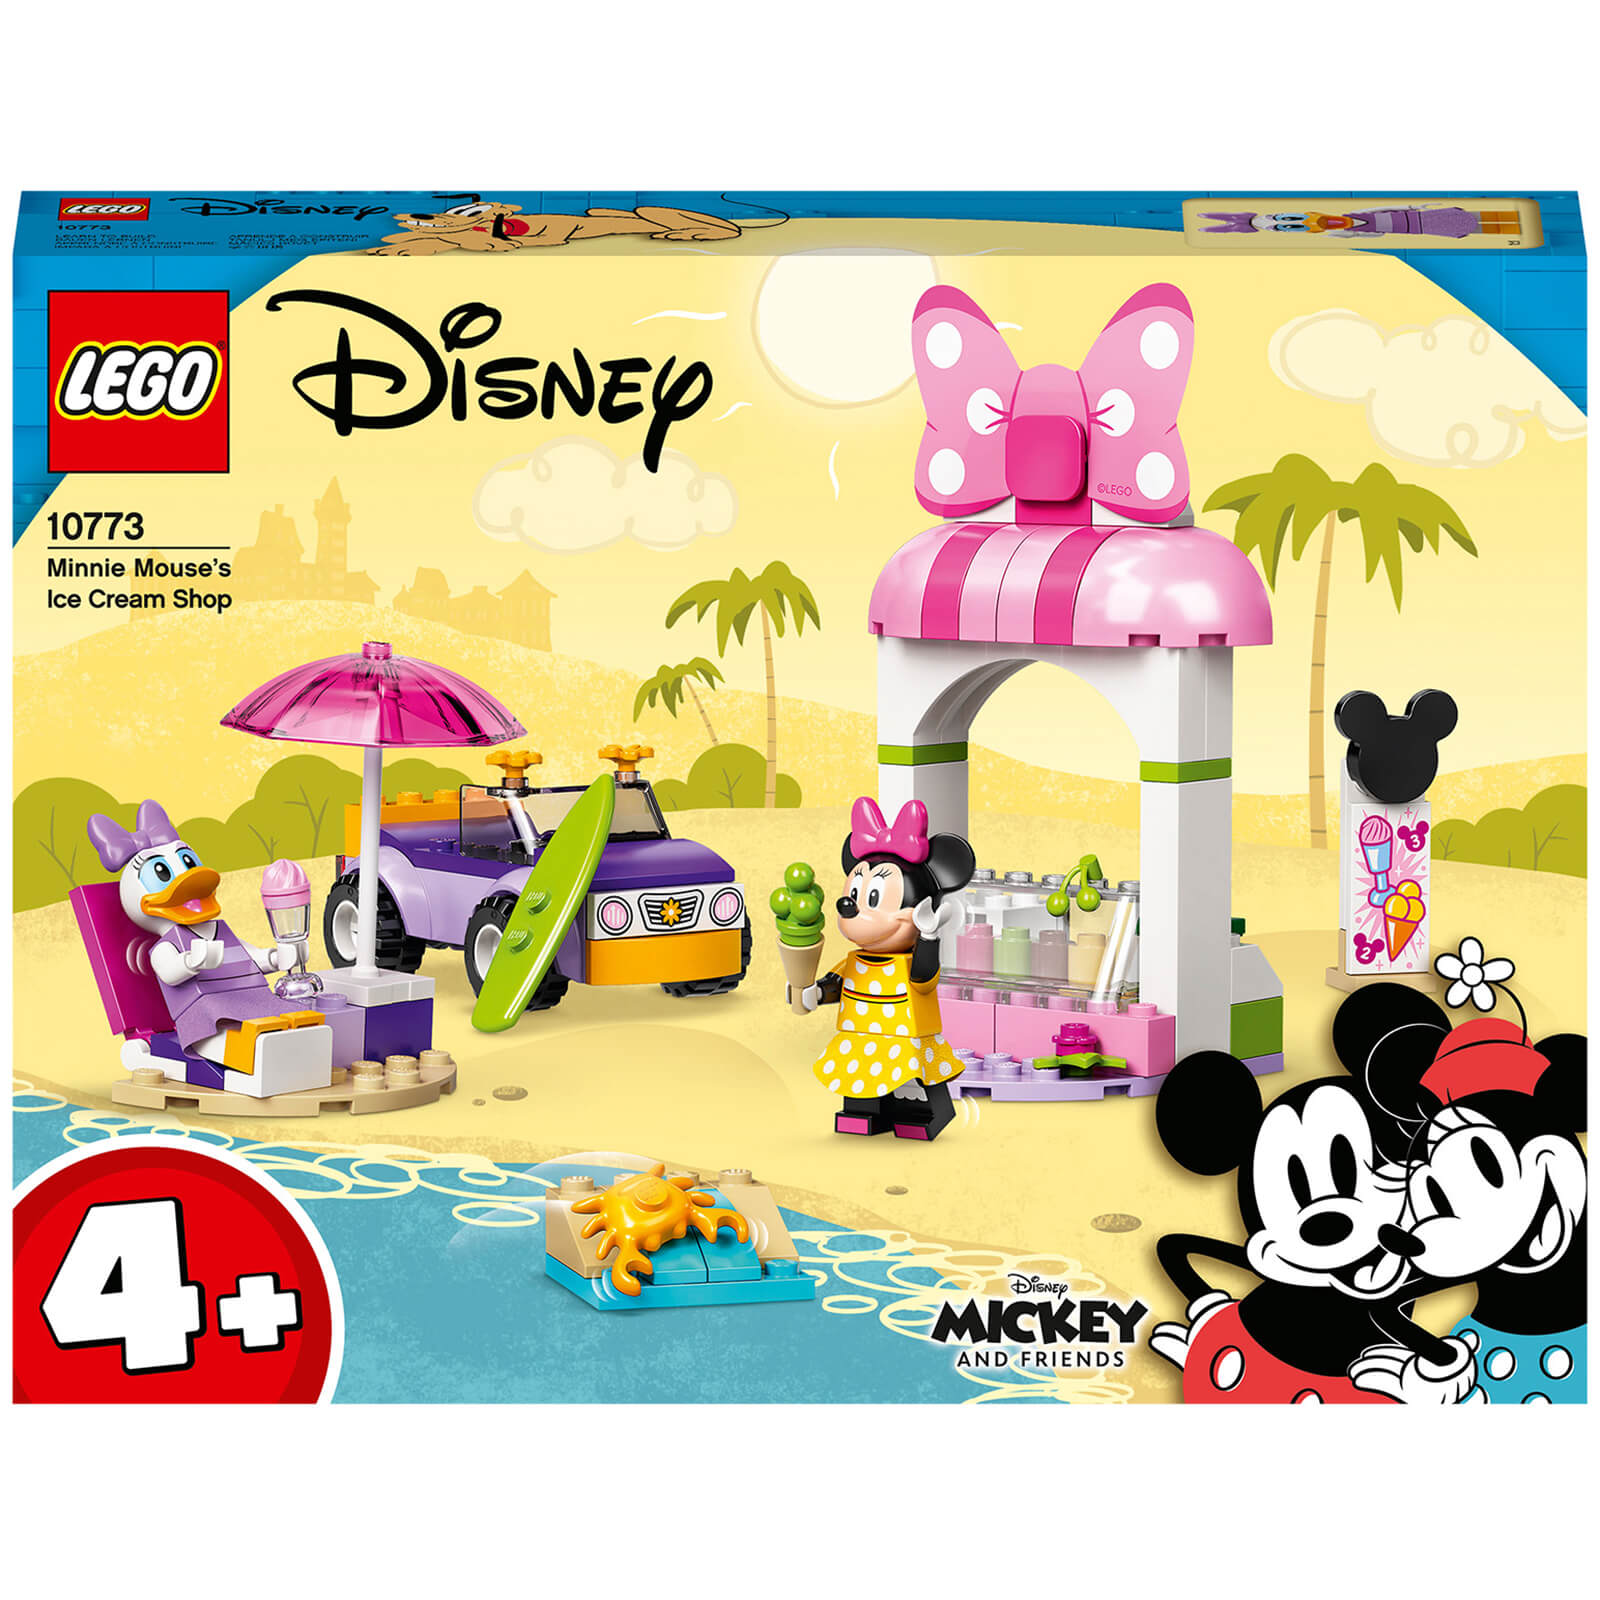 LEGO 4+ Minnie Mouse's Ice Cream Shop Toy (10773)